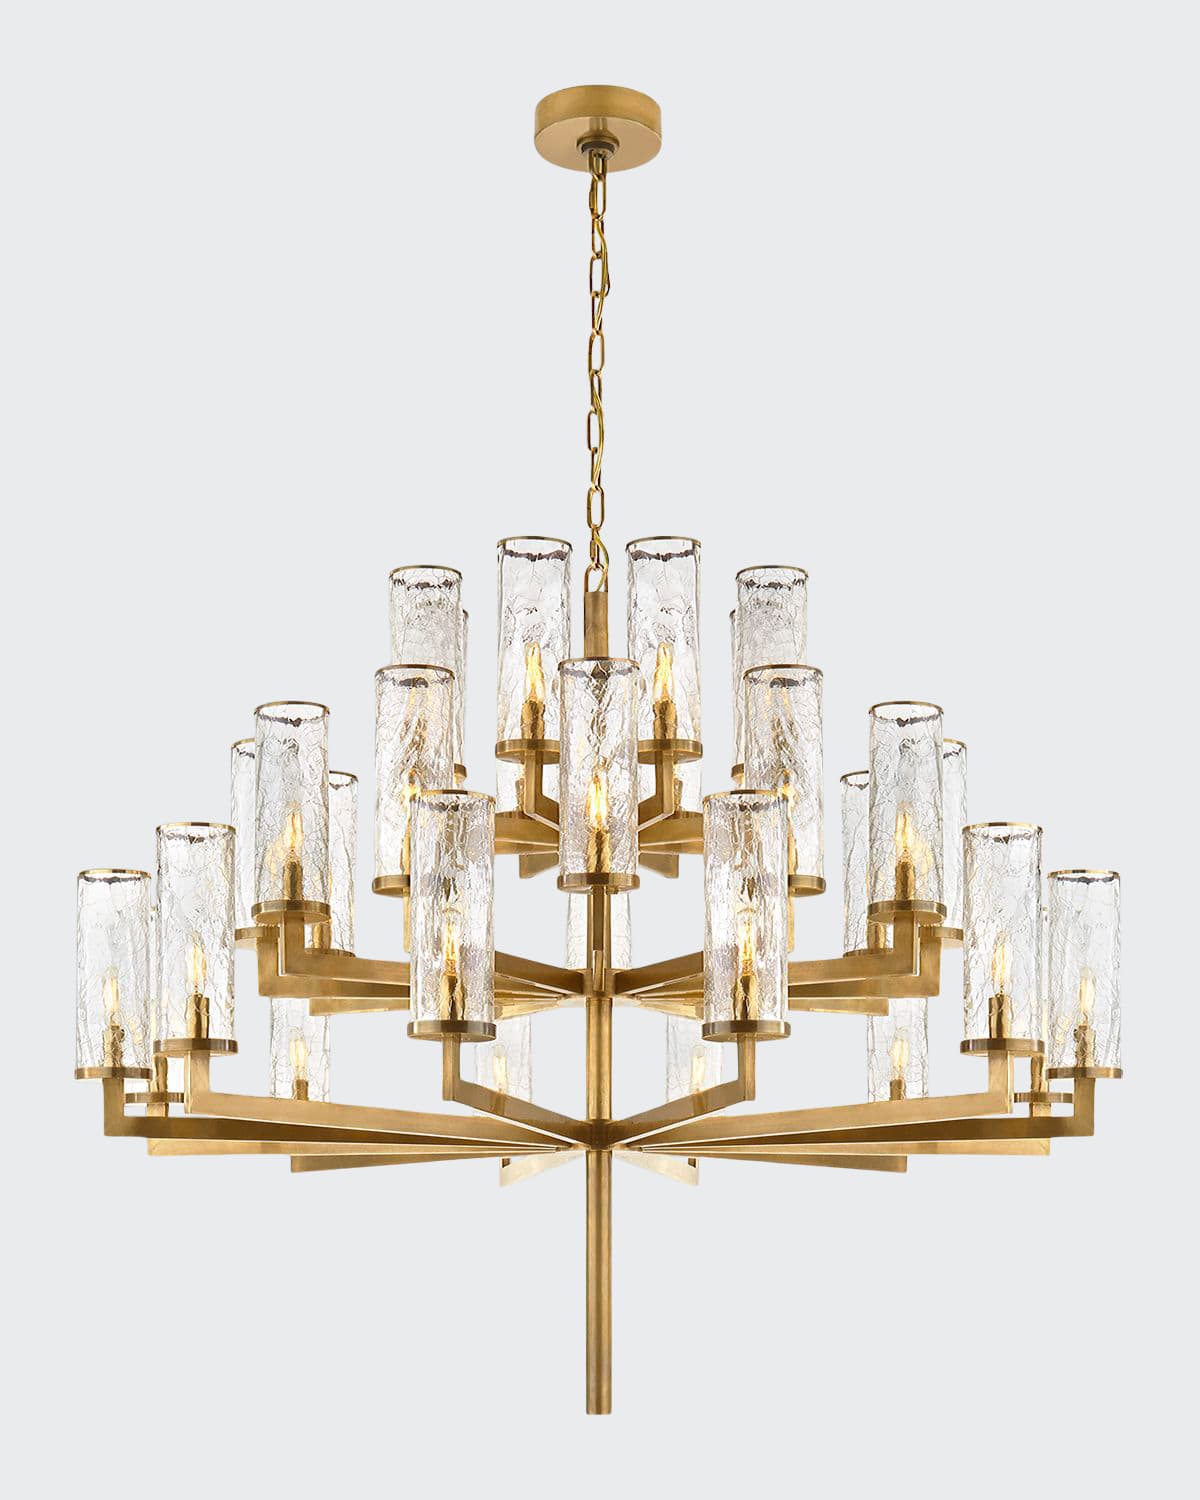 Kelly Wearstler For Visual Comfort Signature Liaison Triple Tier Chandelier In Antique Brass